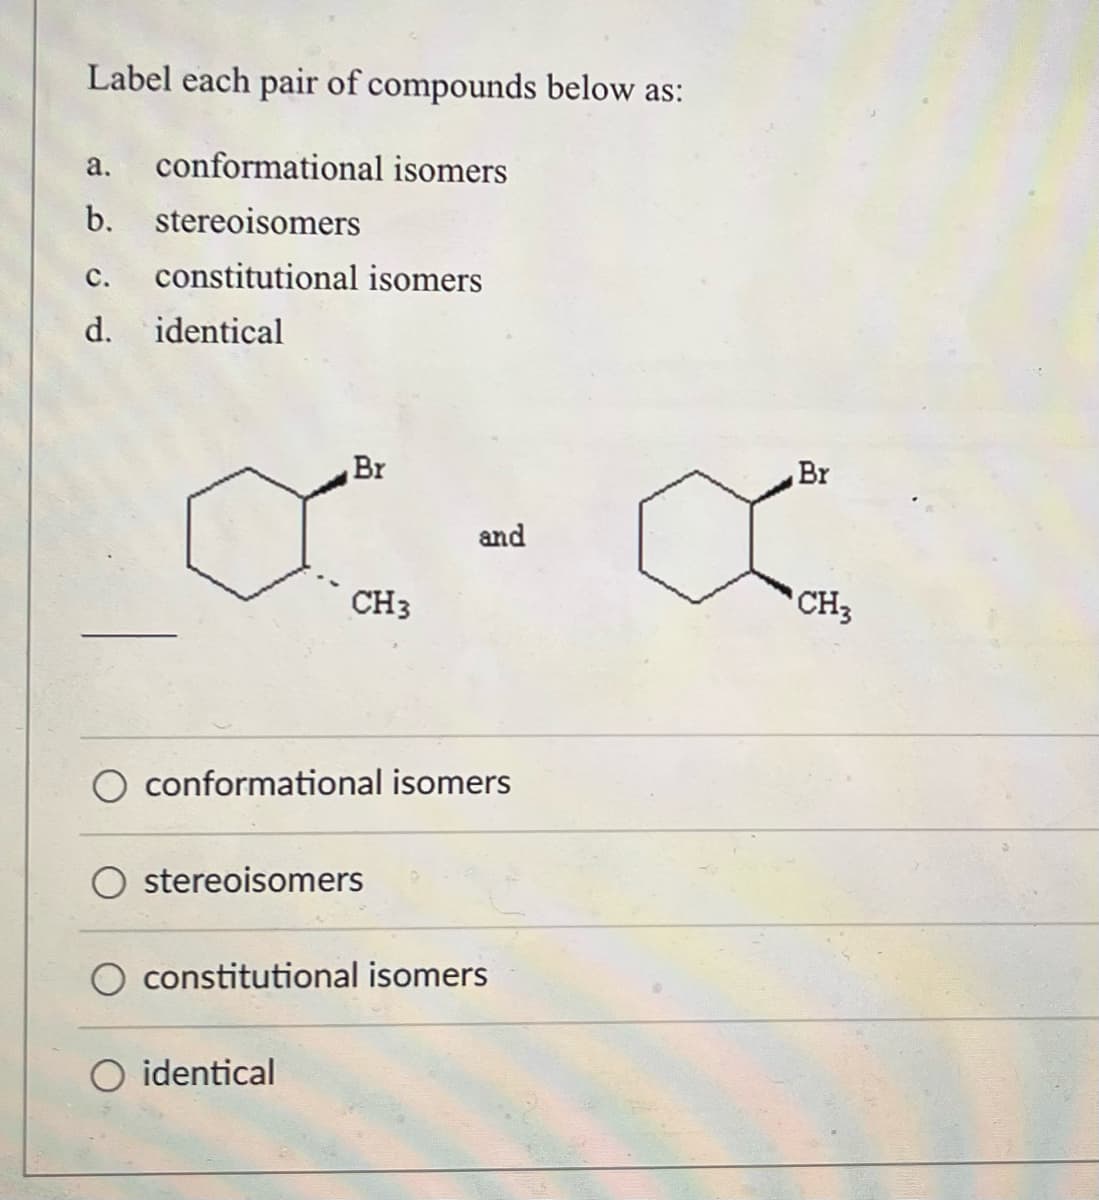 Label each pair of compounds below as:
a. conformational isomers
b. stereoisomers
C. constitutional isomers
d. identical
Br
CH 3
conformational isomers
stereoisomers
constitutional isomers
O identical
and
Br
x
CH3